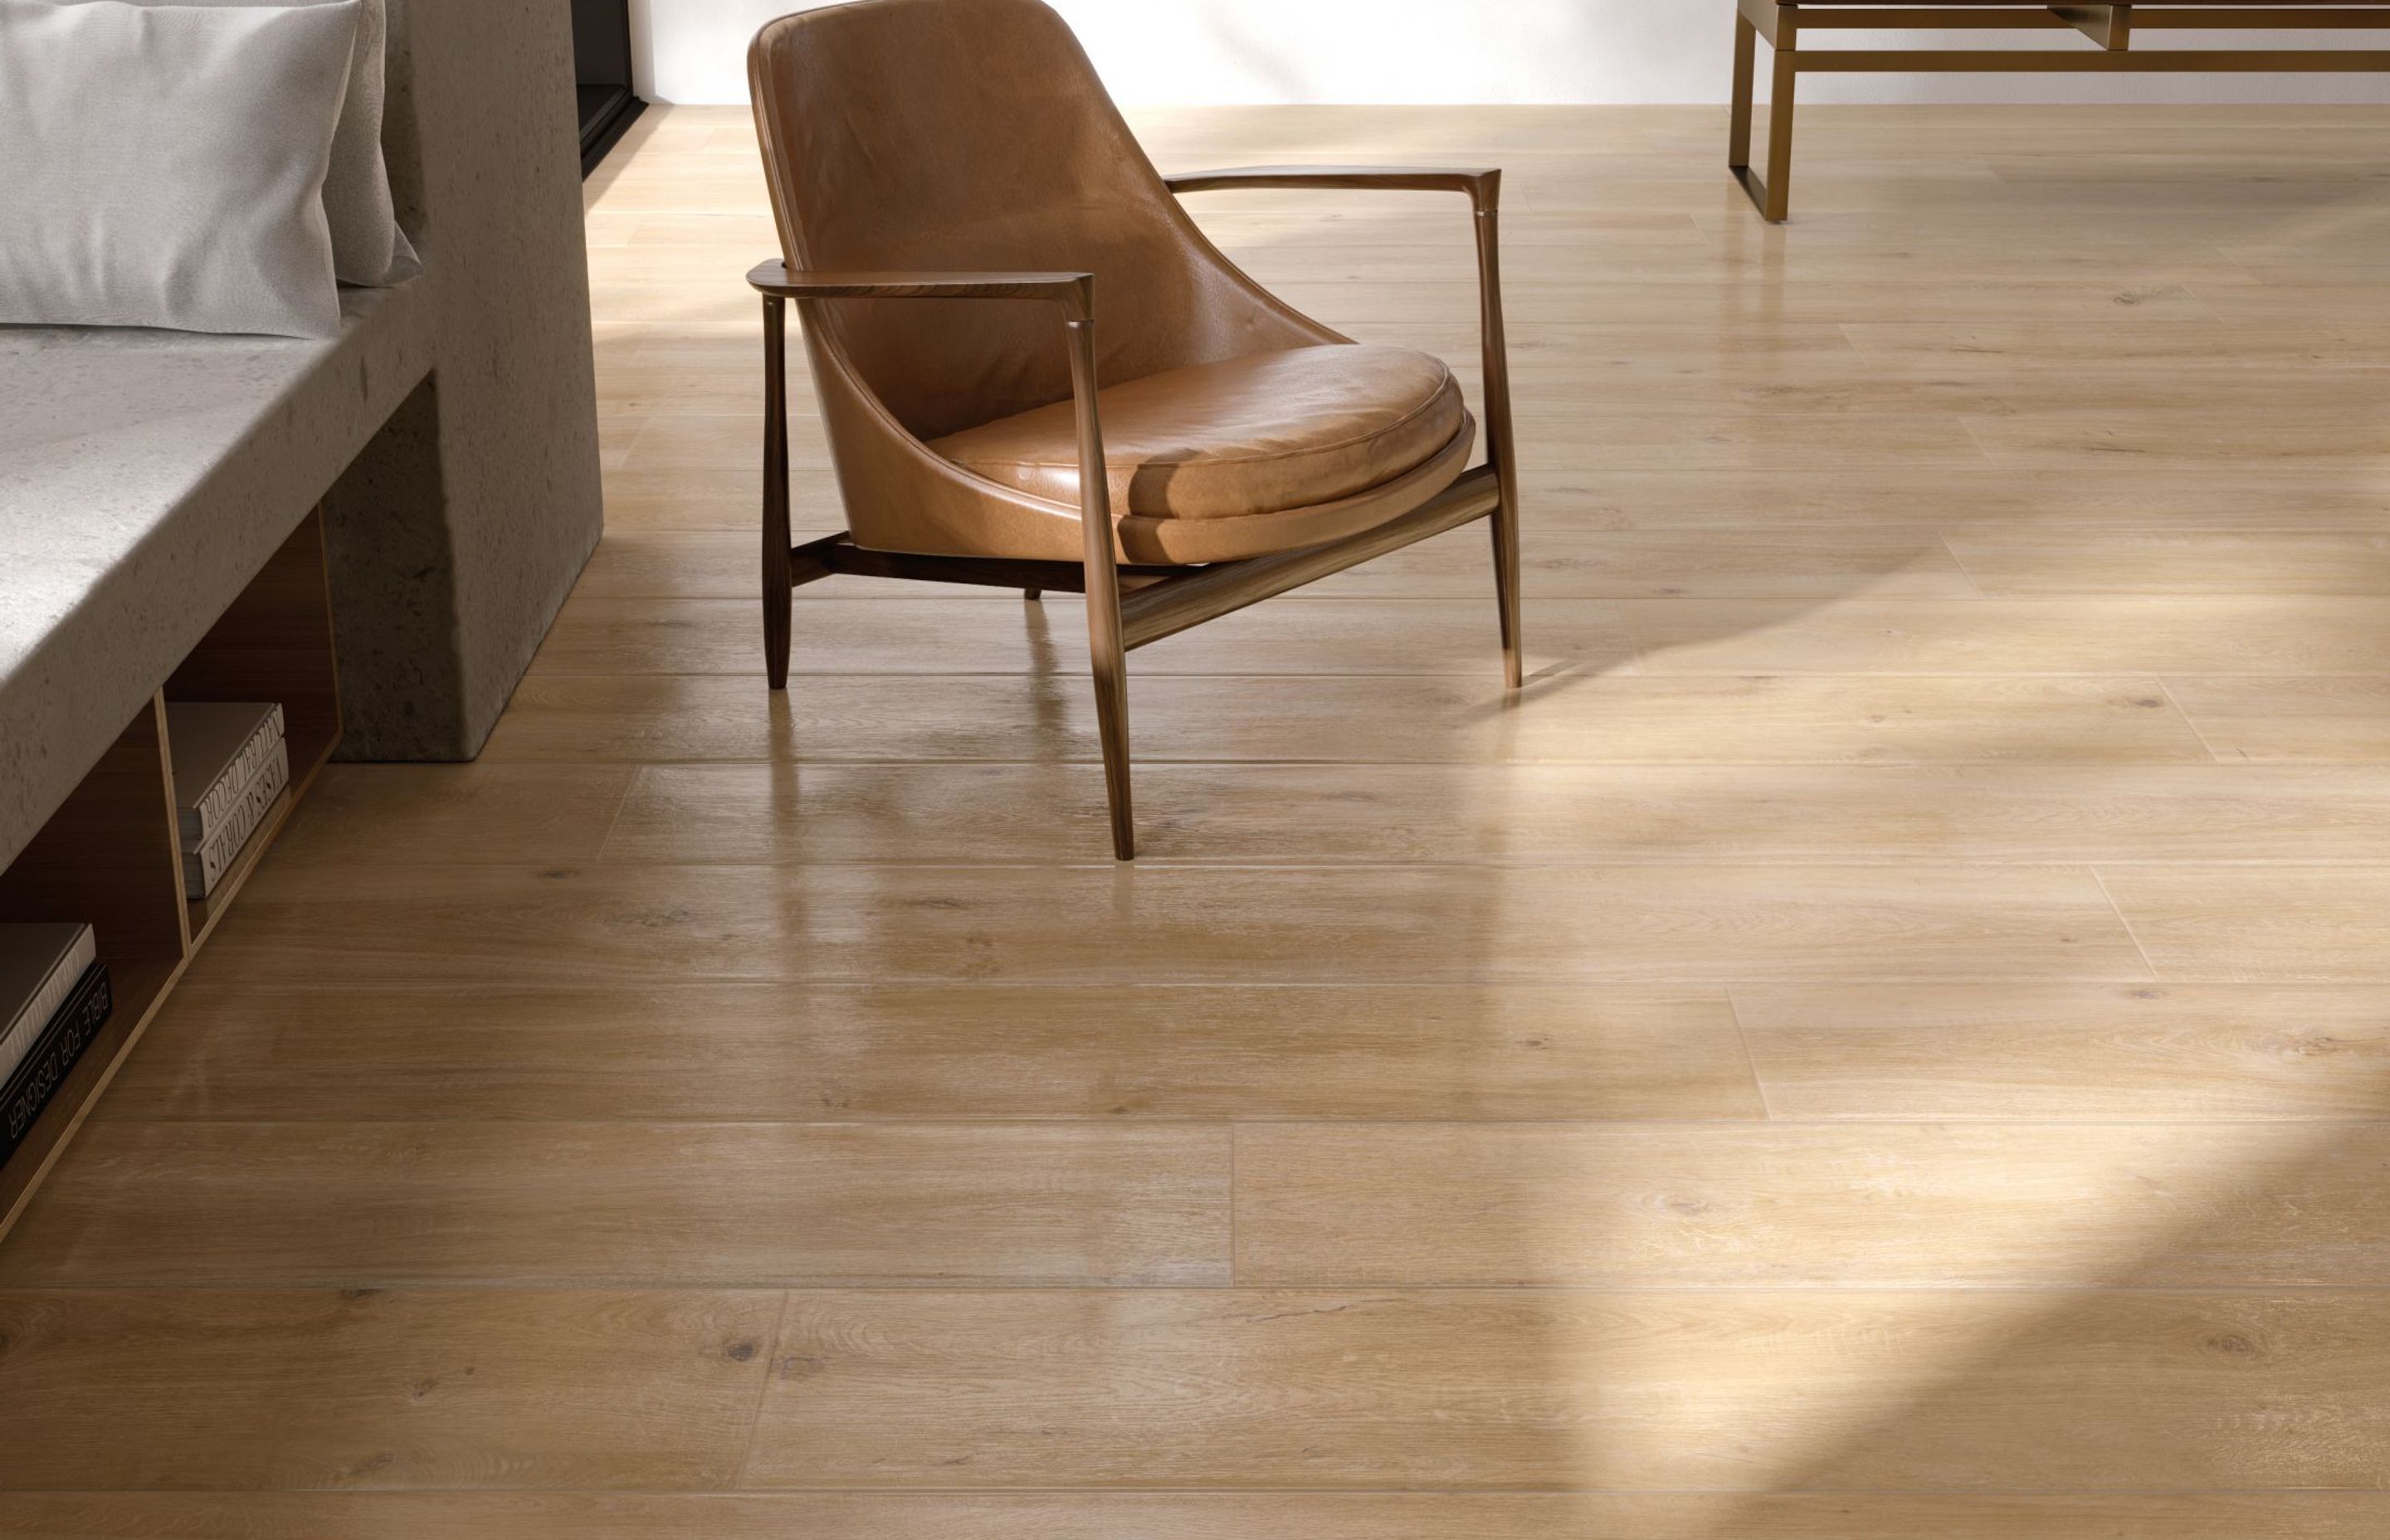 The technology available today allows for the creation of tiles that mimic natural timbers, such as Quantum's Megeve collection of timber-look porcelain tiles.